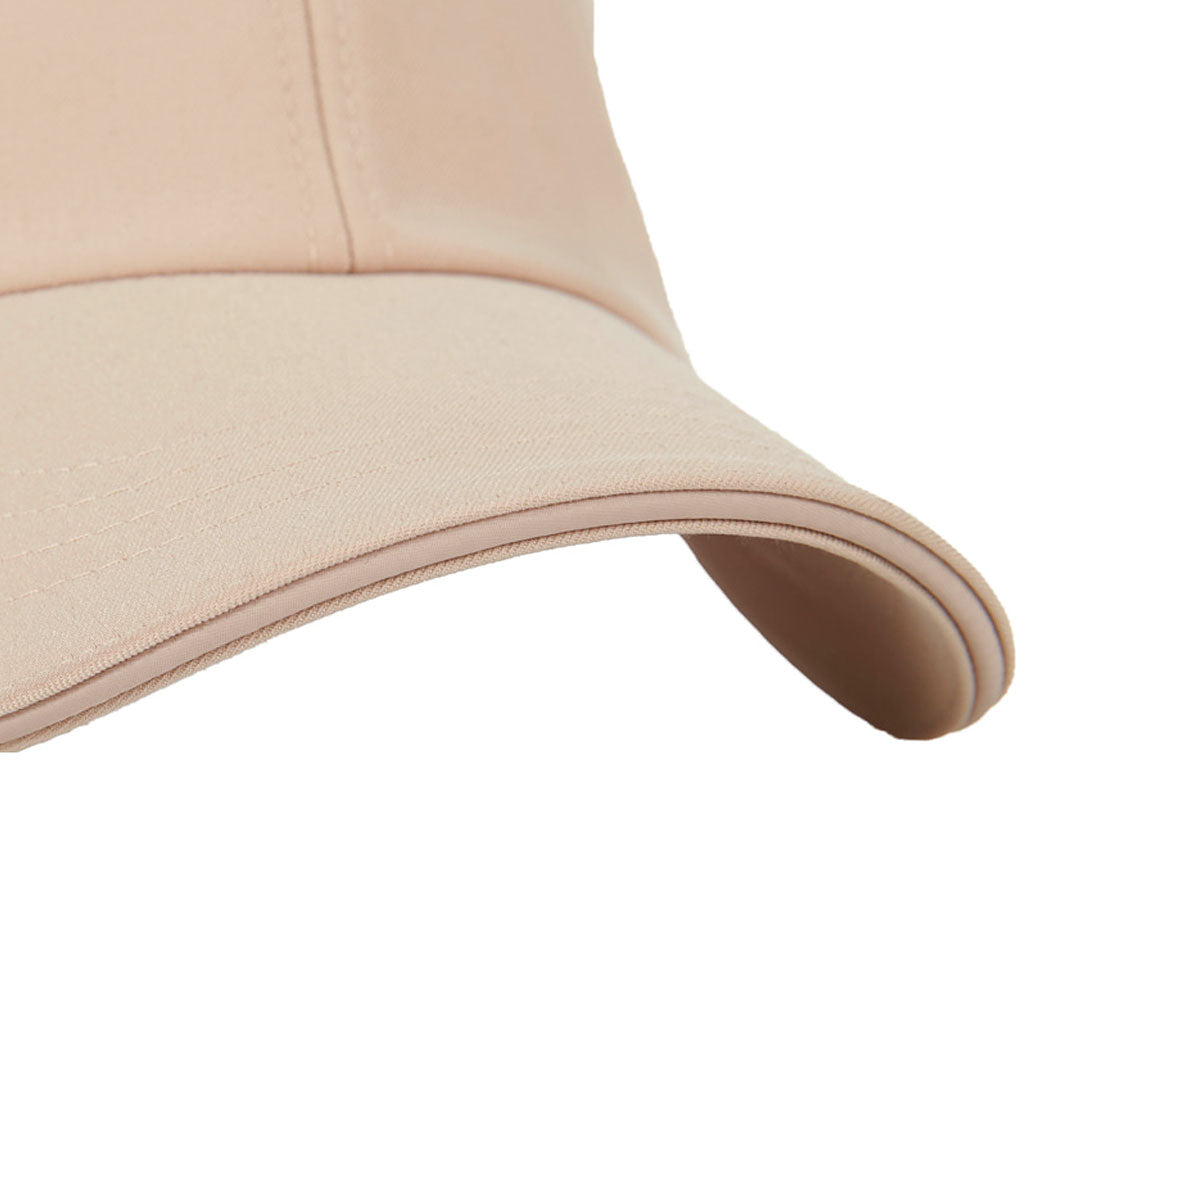 VARZAR - SILVER STUD OVER FIT BALL CAP BEIGE【VZR4-0006】